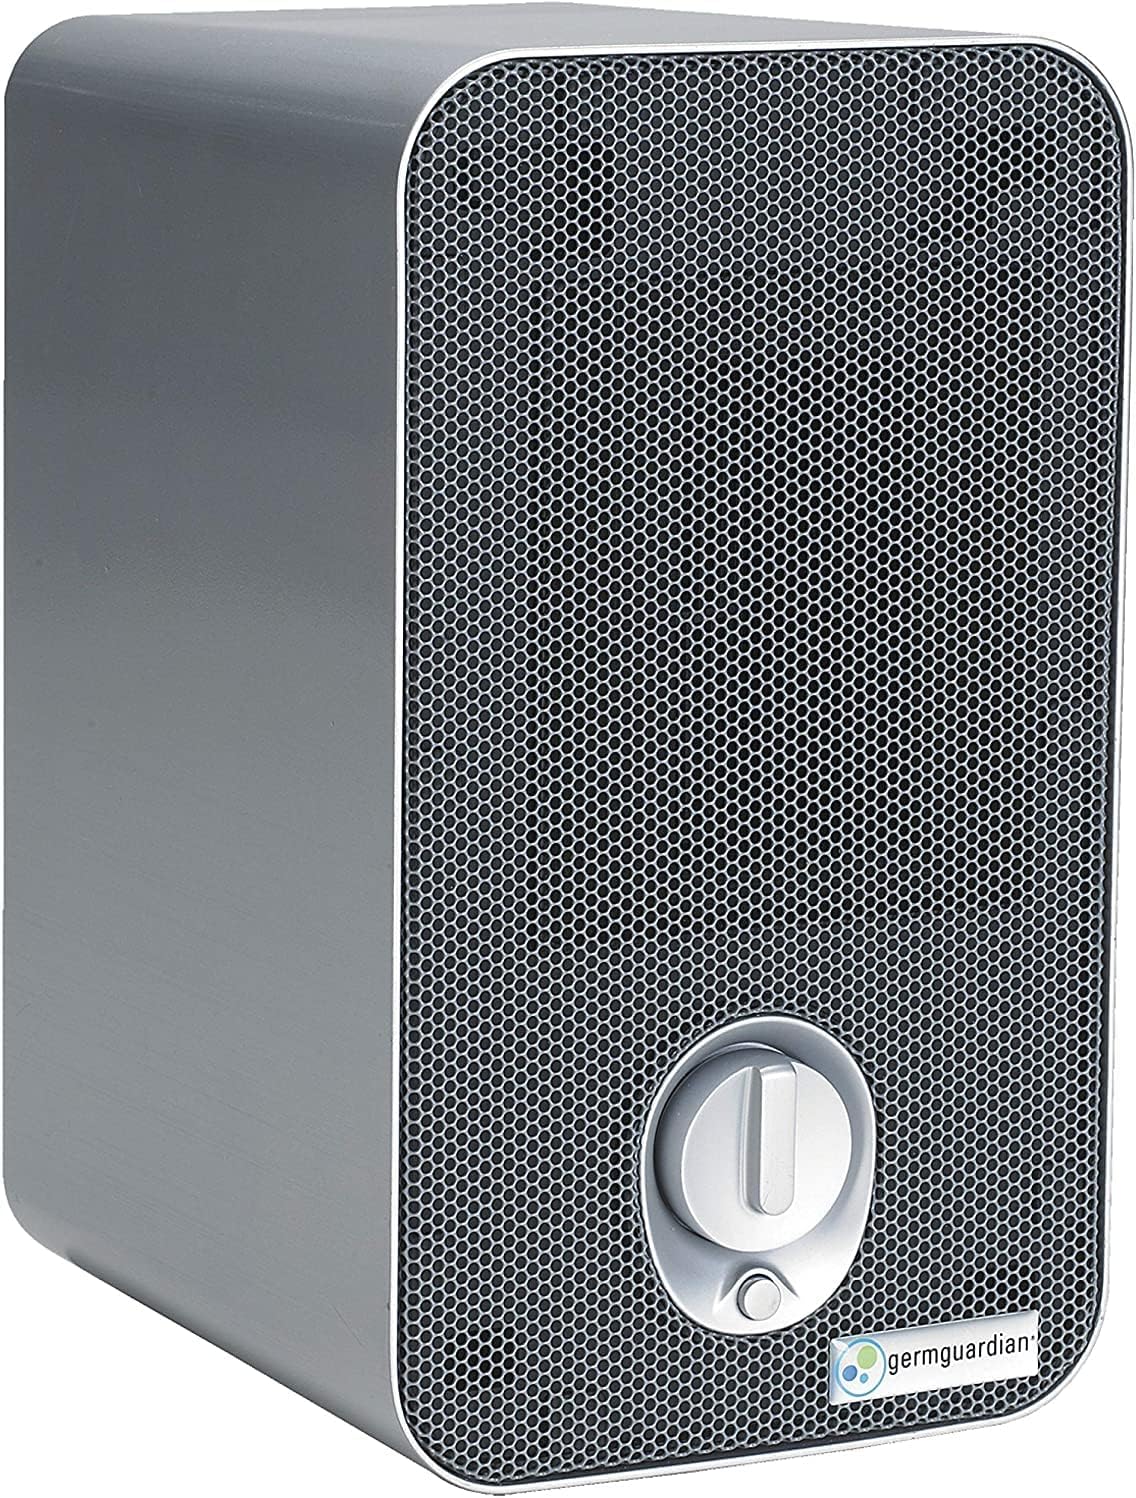 GermGuardian Desktop Air Purifier for Home, H13 HEPA Filter, Removes Dust, Allergens, Smoke, Pollen, Odors, Mold, UV-C Light Helps Reduce Germs, 11 Inch, Silver, AC4100